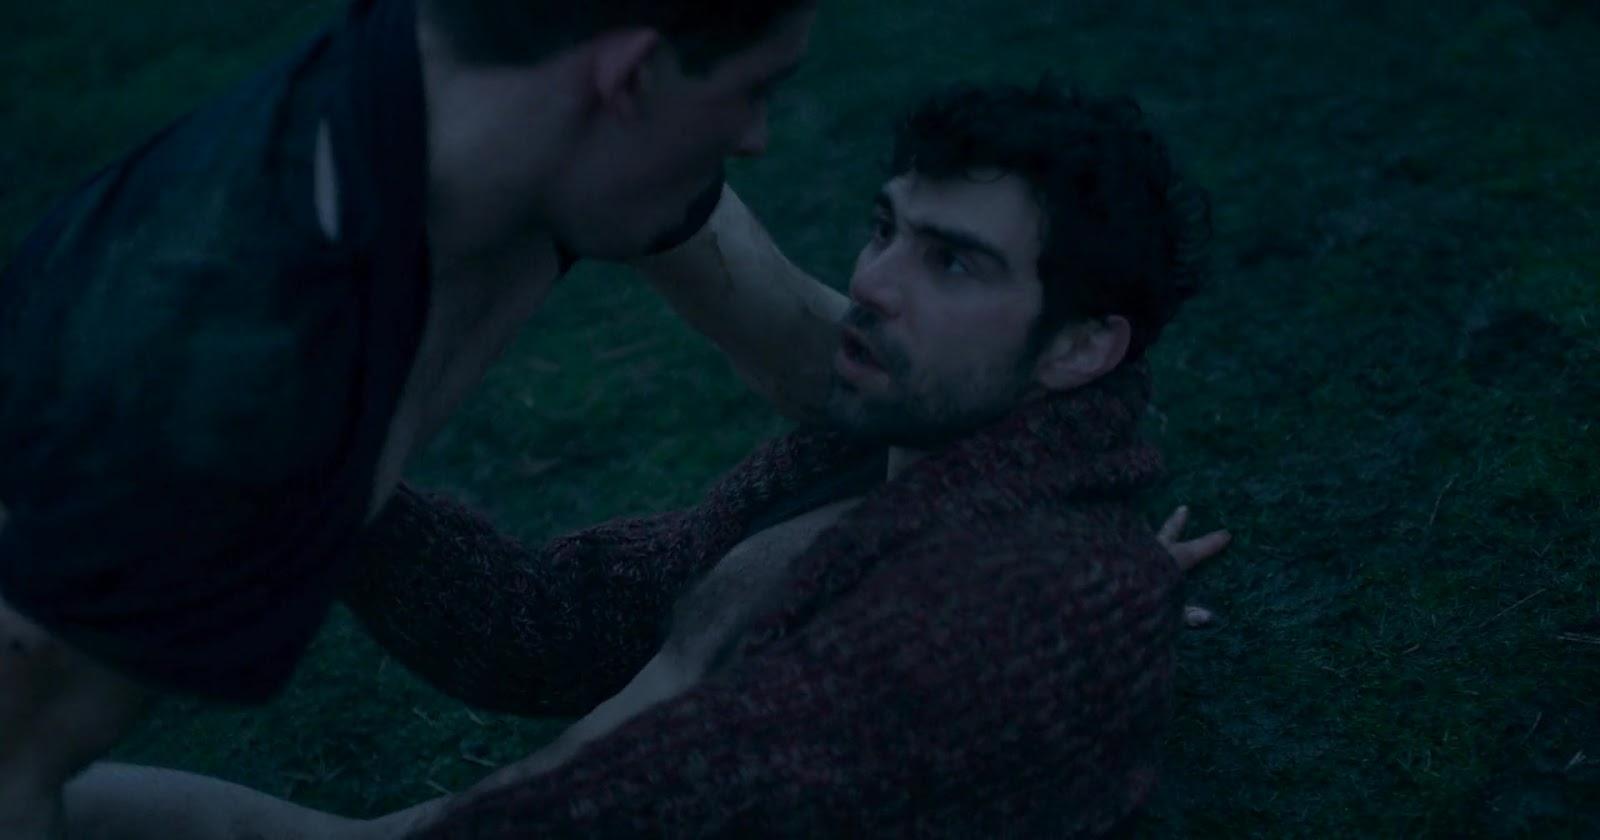 Alec Secareanu and Josh O'Connor nude in God's Own Country.